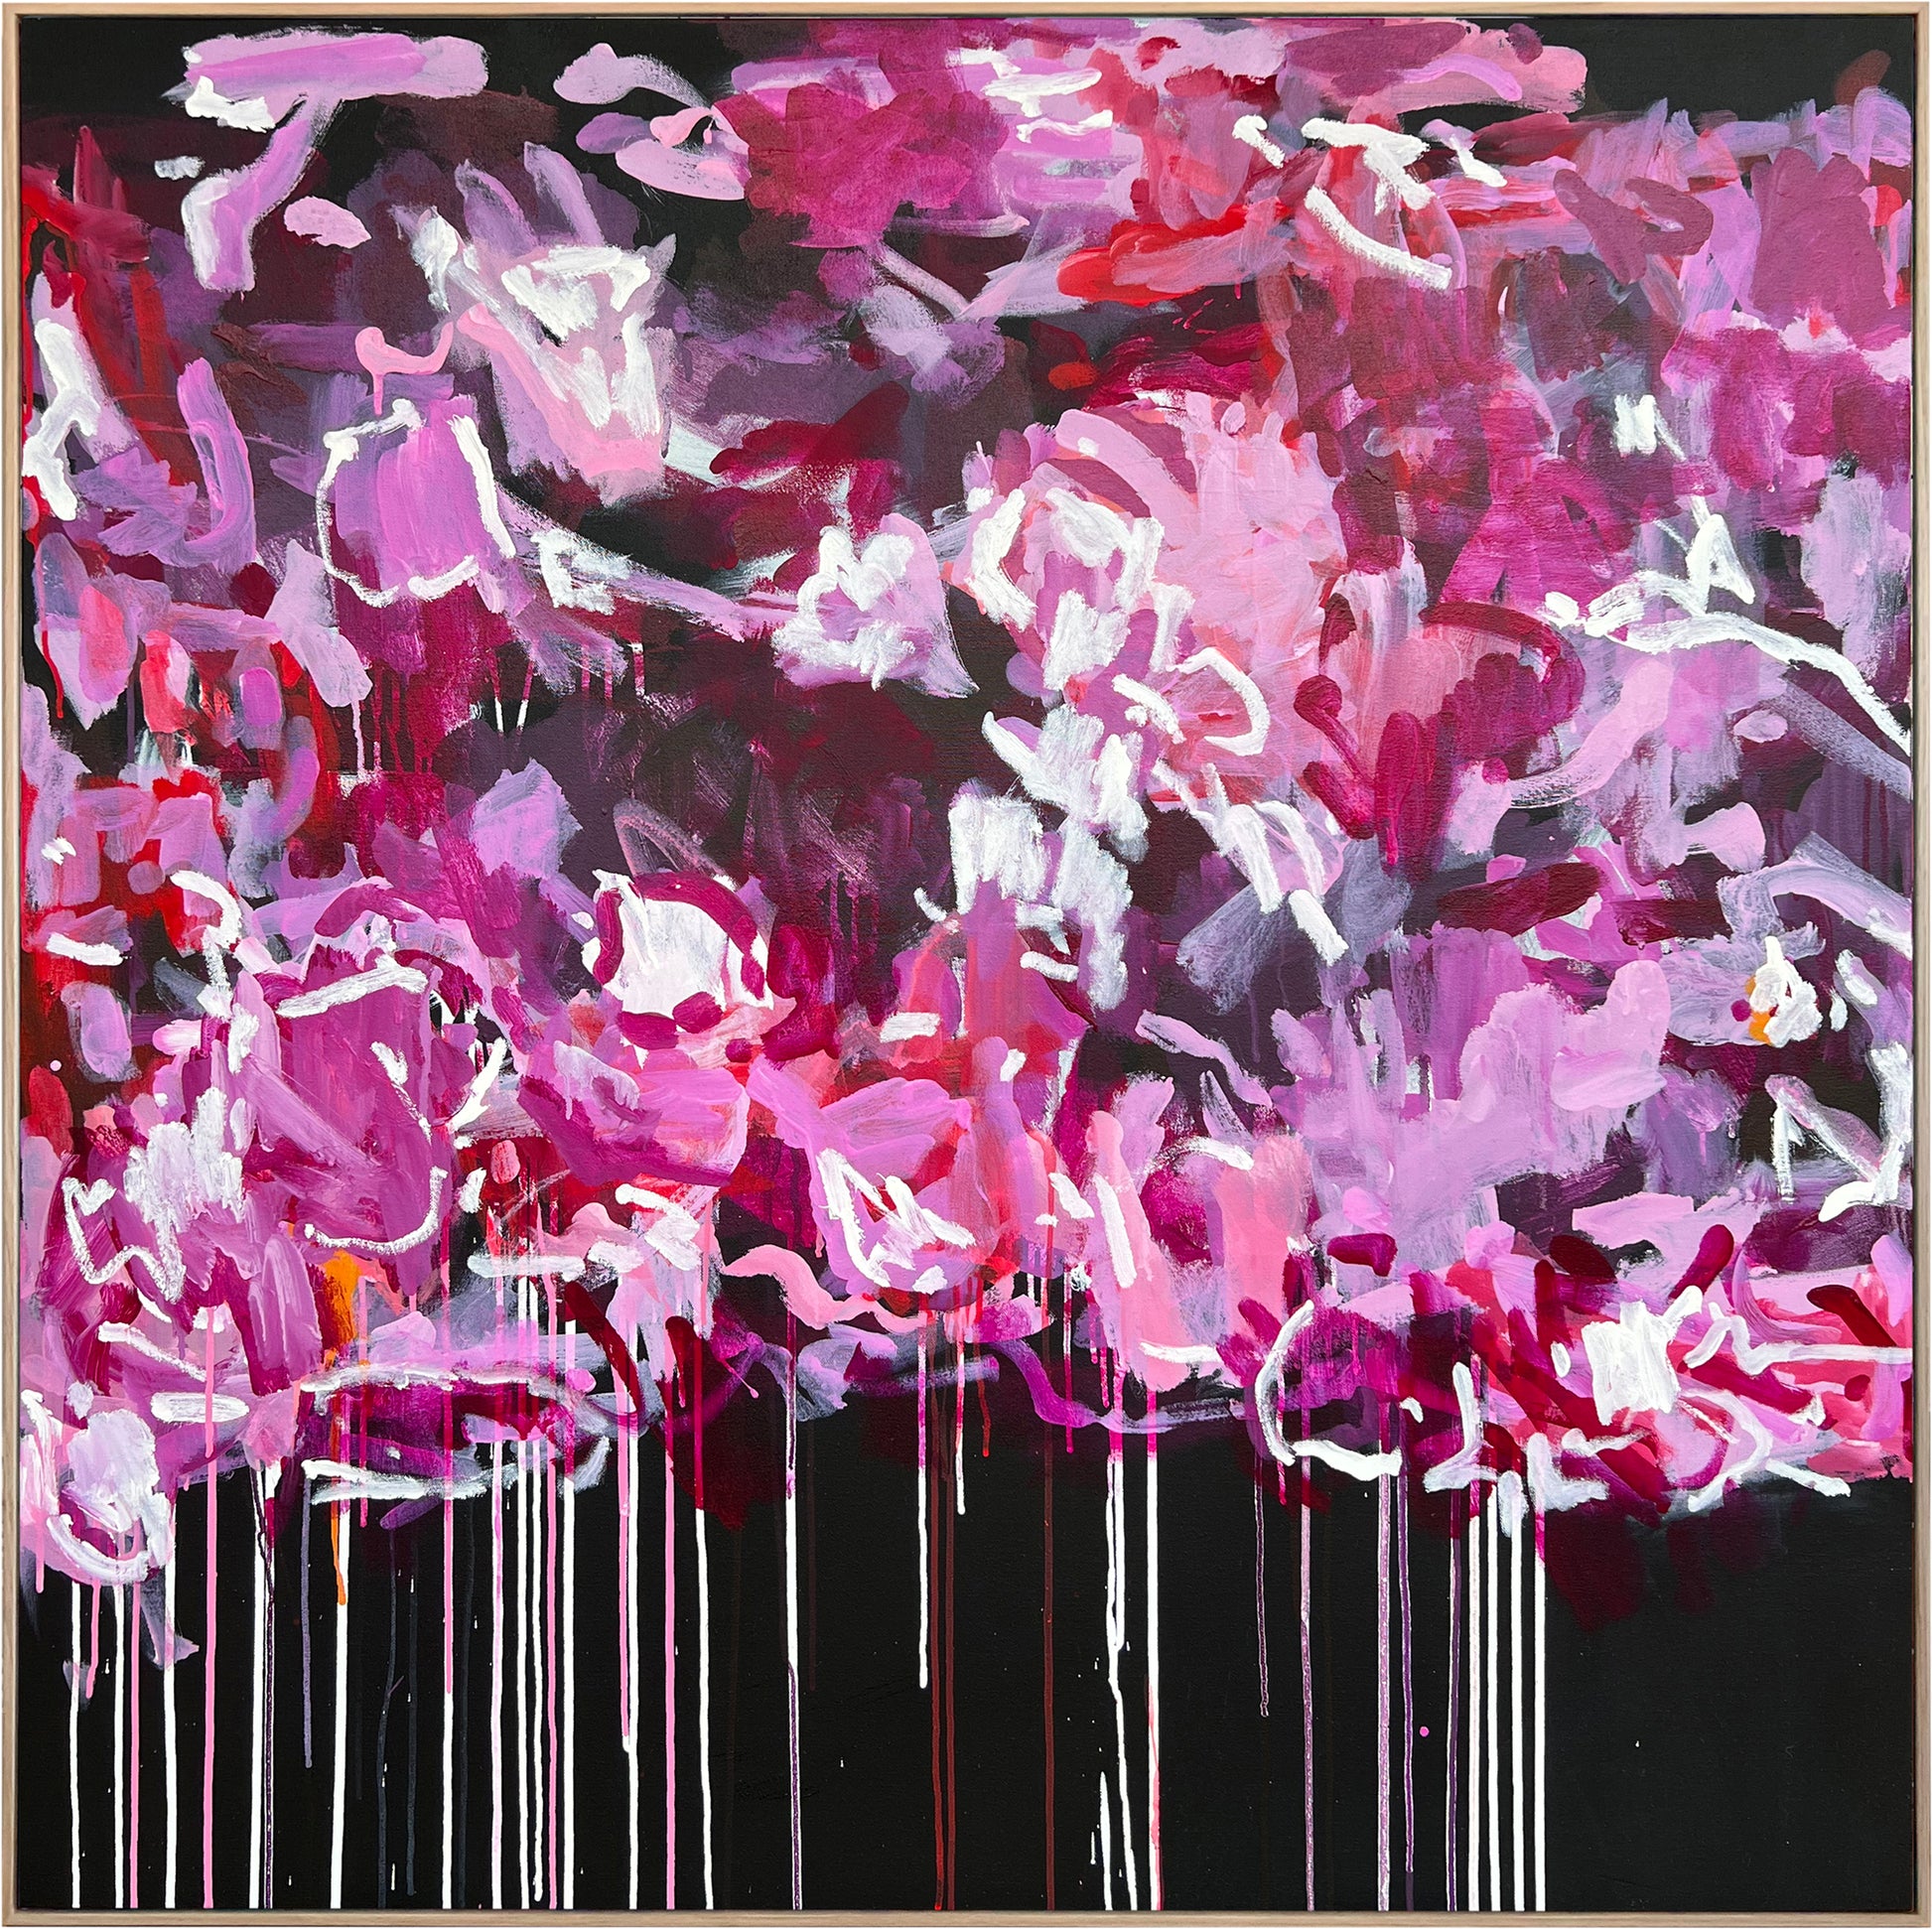 Australian abstract artist | large pink painting | modern art | Perth artistAustralian abstract artist | large pink painting | modern art | Perth artist